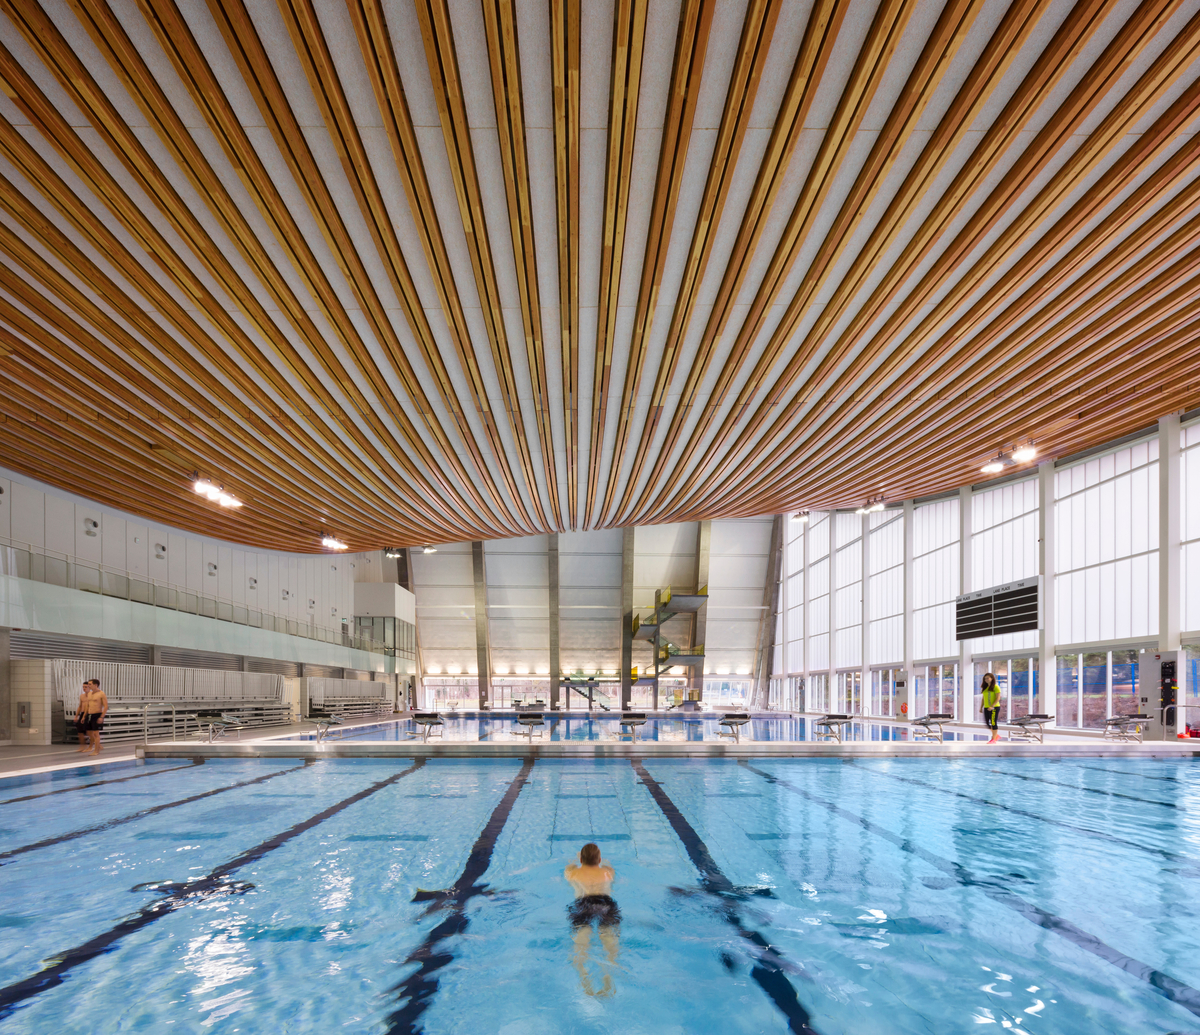 Interior view of Grandview Heights Aquatic Centre showing glue-laminated timber (glulam) prefab roof assembly